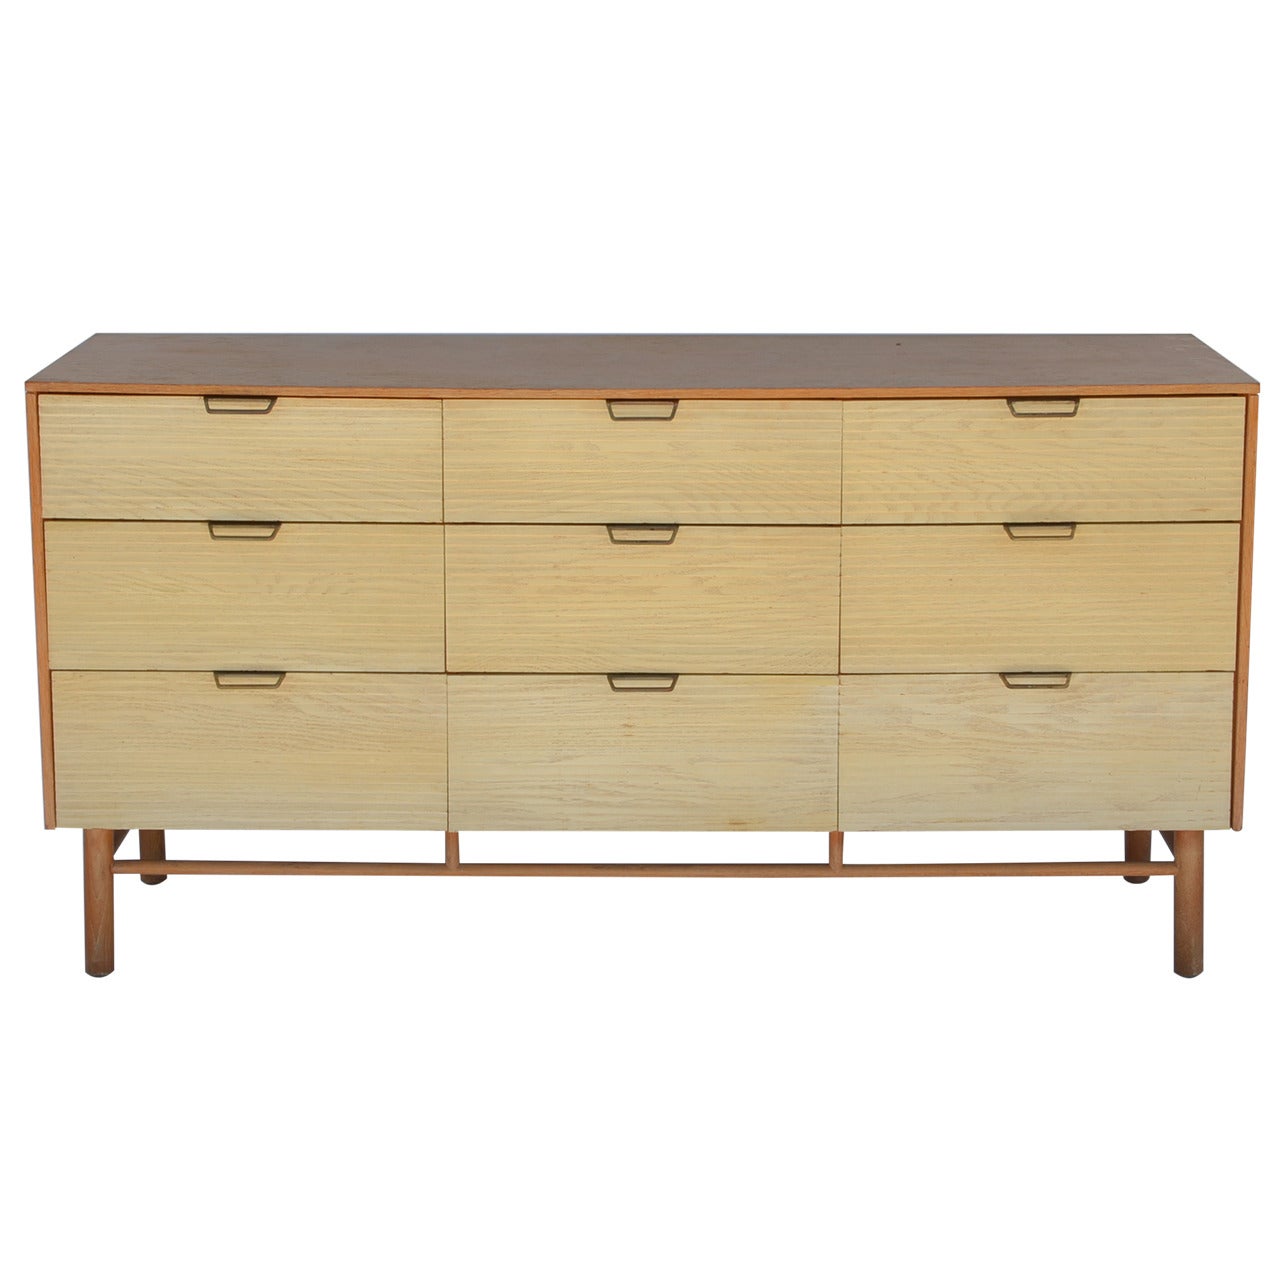 Impeccable Nine-Drawer Dresser by Raymond Loewy for Mengel